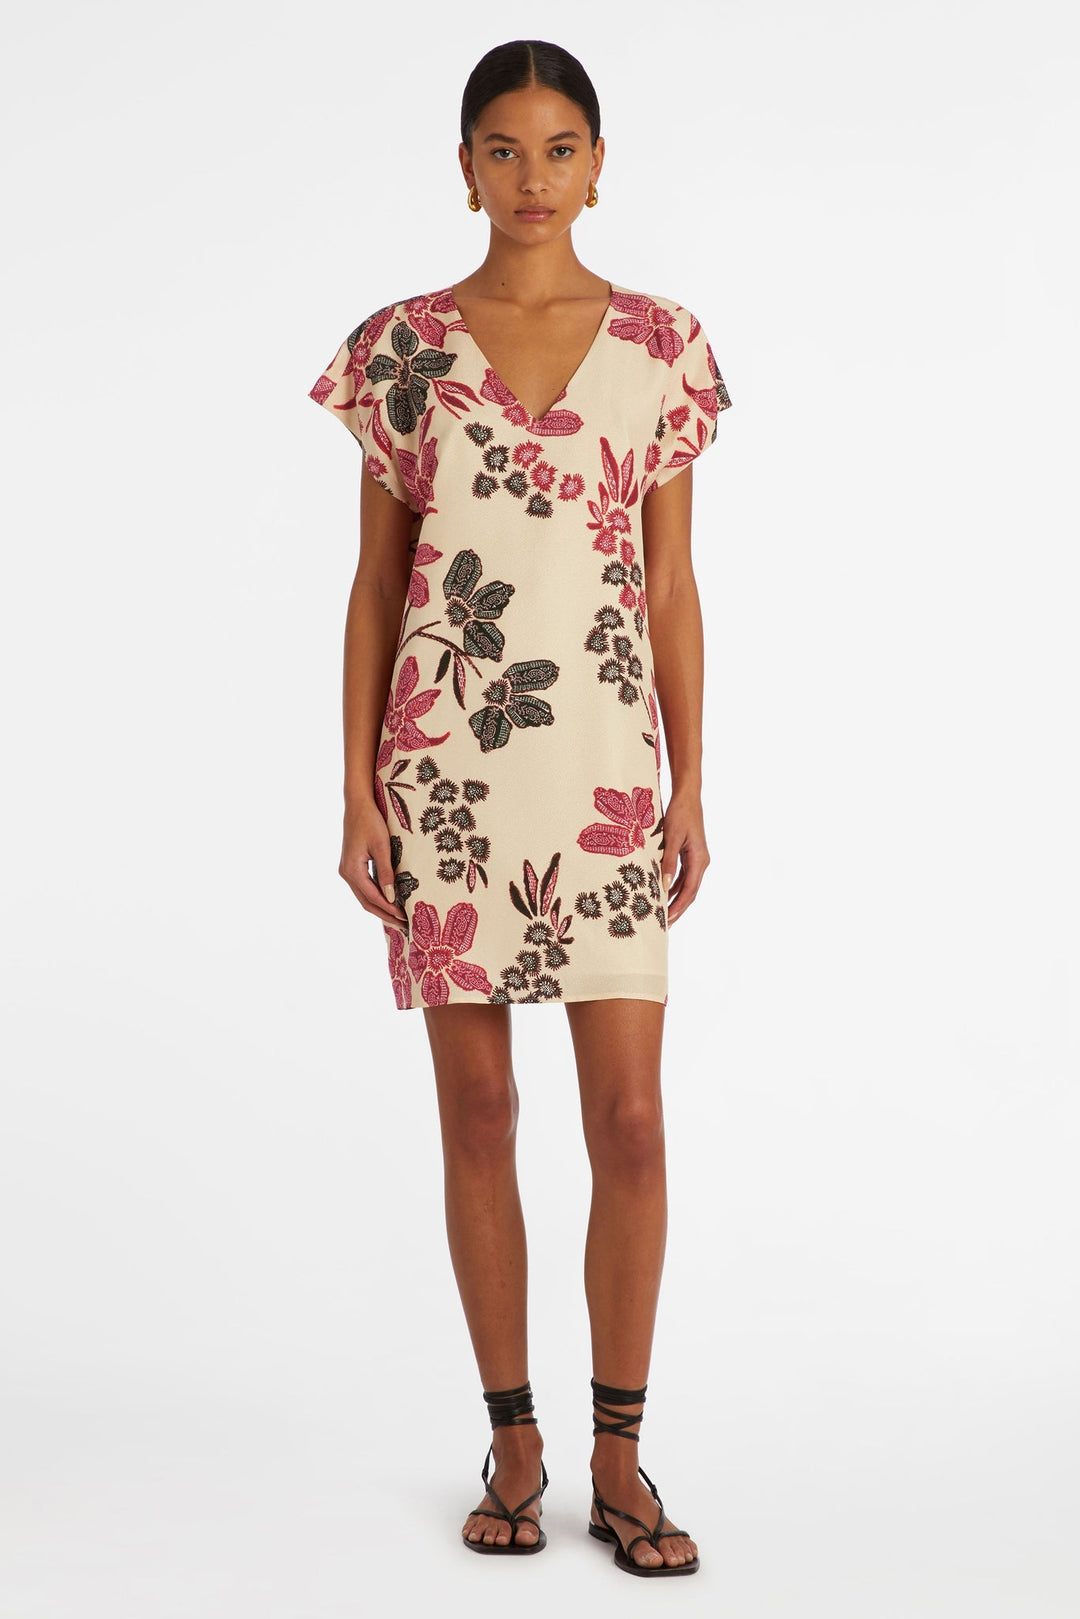 Marie Oliver - Andi Cherry Blossom Dress - Shorely Chic Boutique